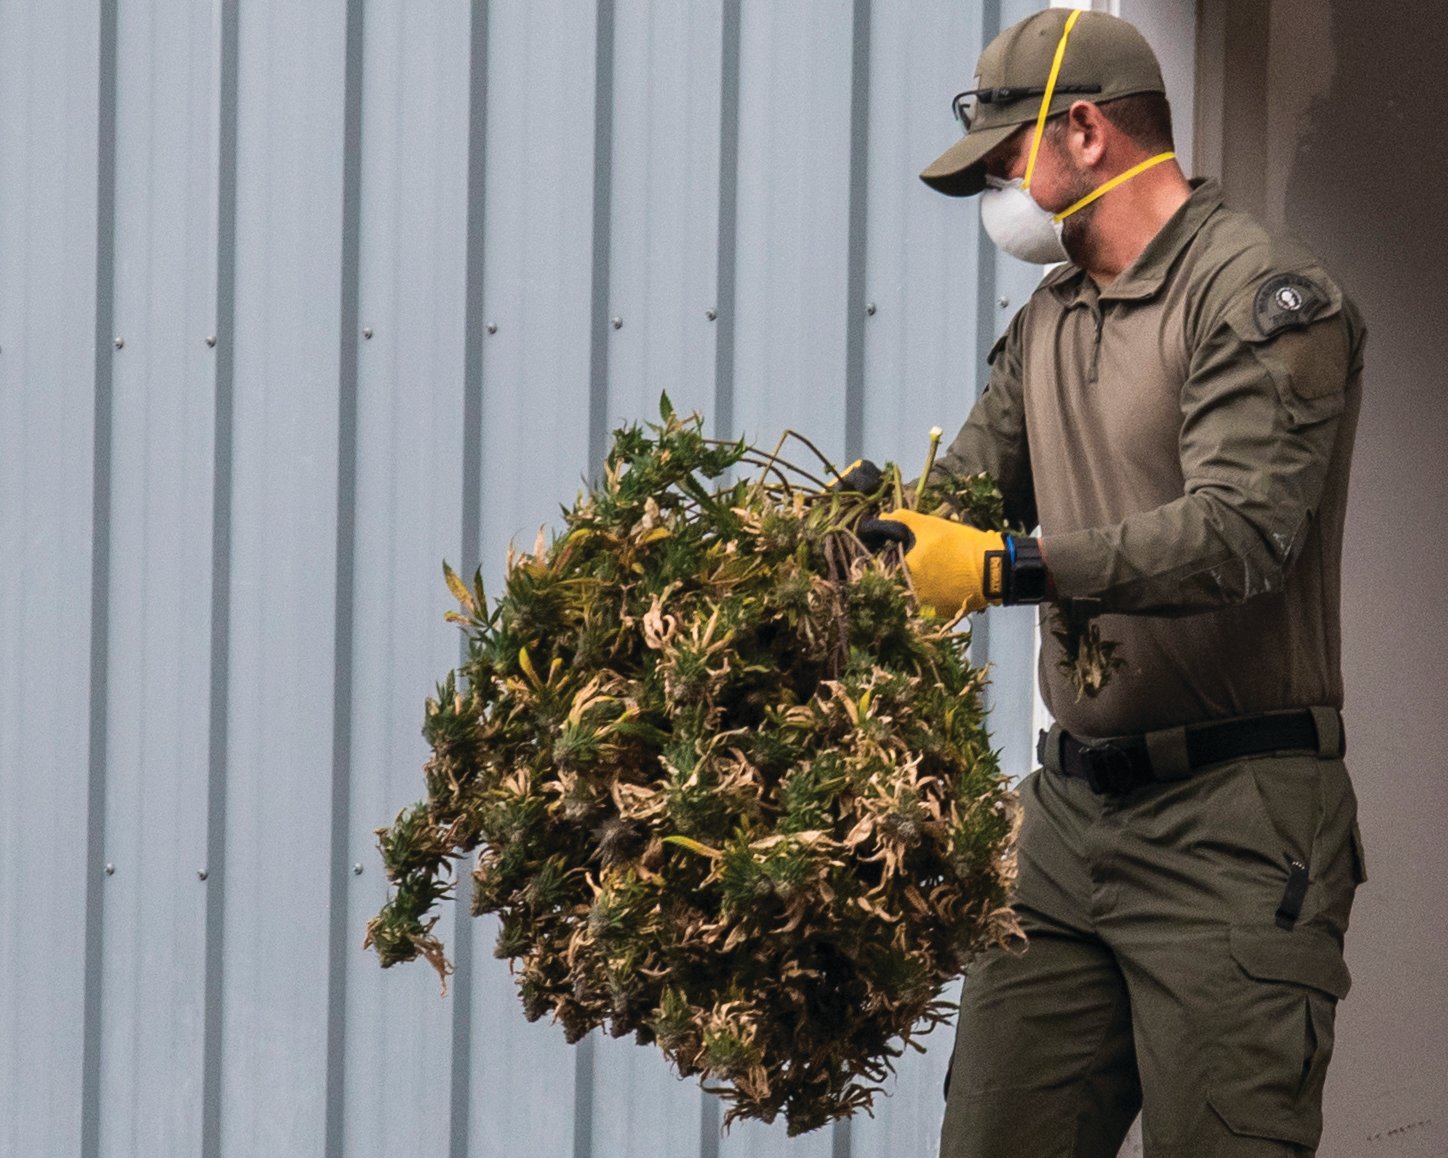 A member of law enforcement removes plants from a structure near the intersection of Carroll Way and Frogner Road Thursday in Chehalis.